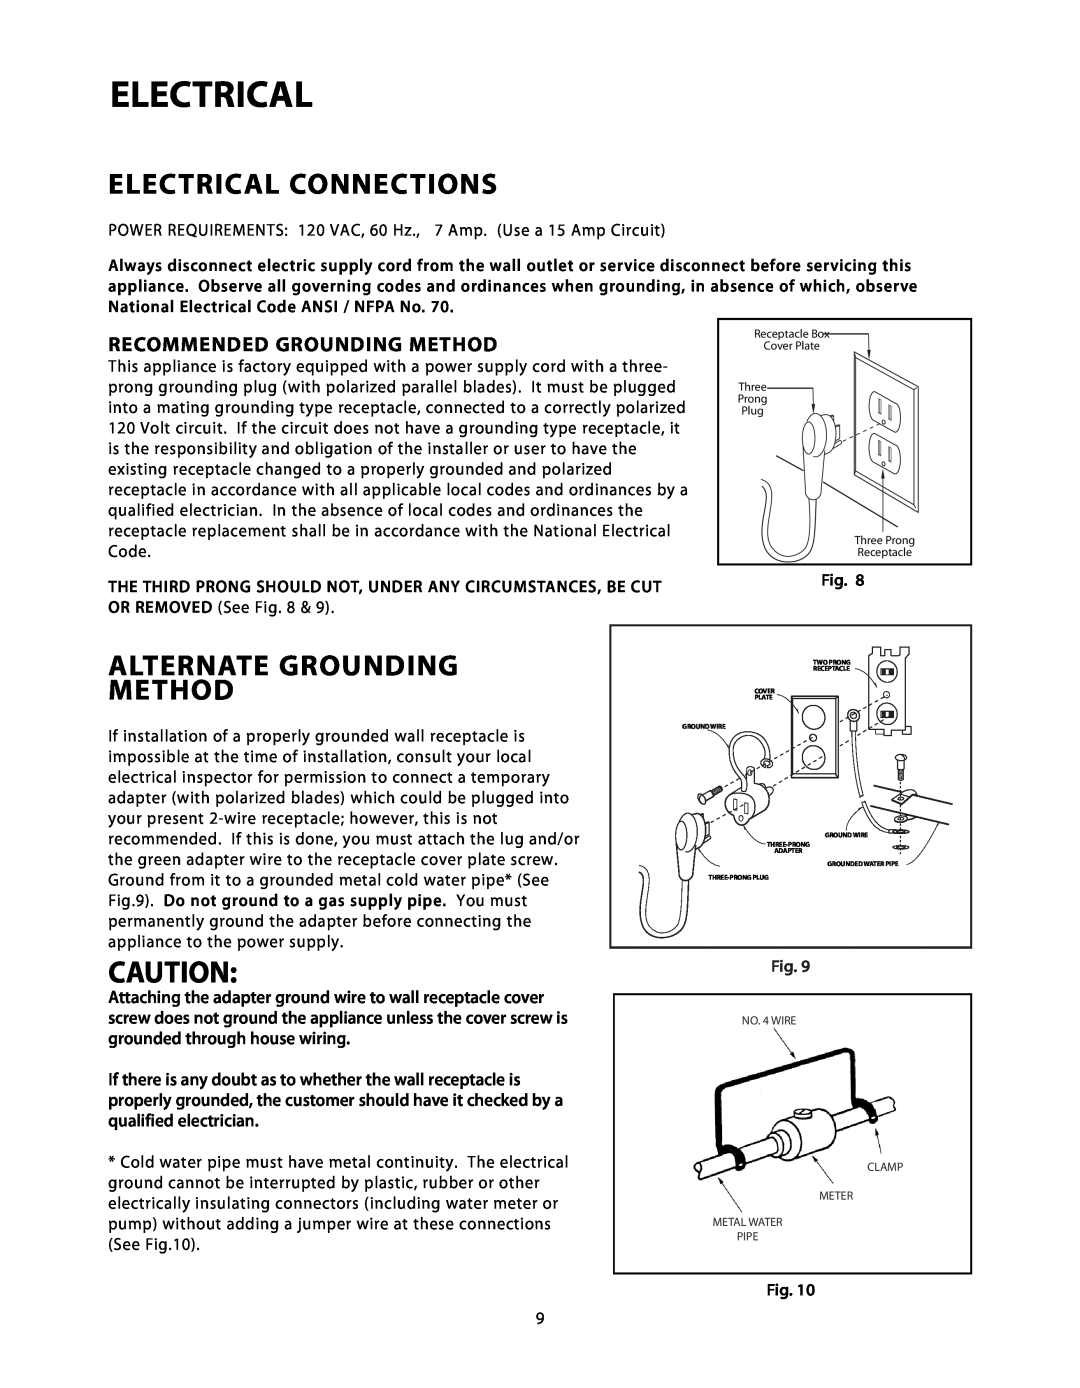 DCS C-24 installation instructions Electrical Connections, Alternate Grounding Method, Recommended Grounding Method 